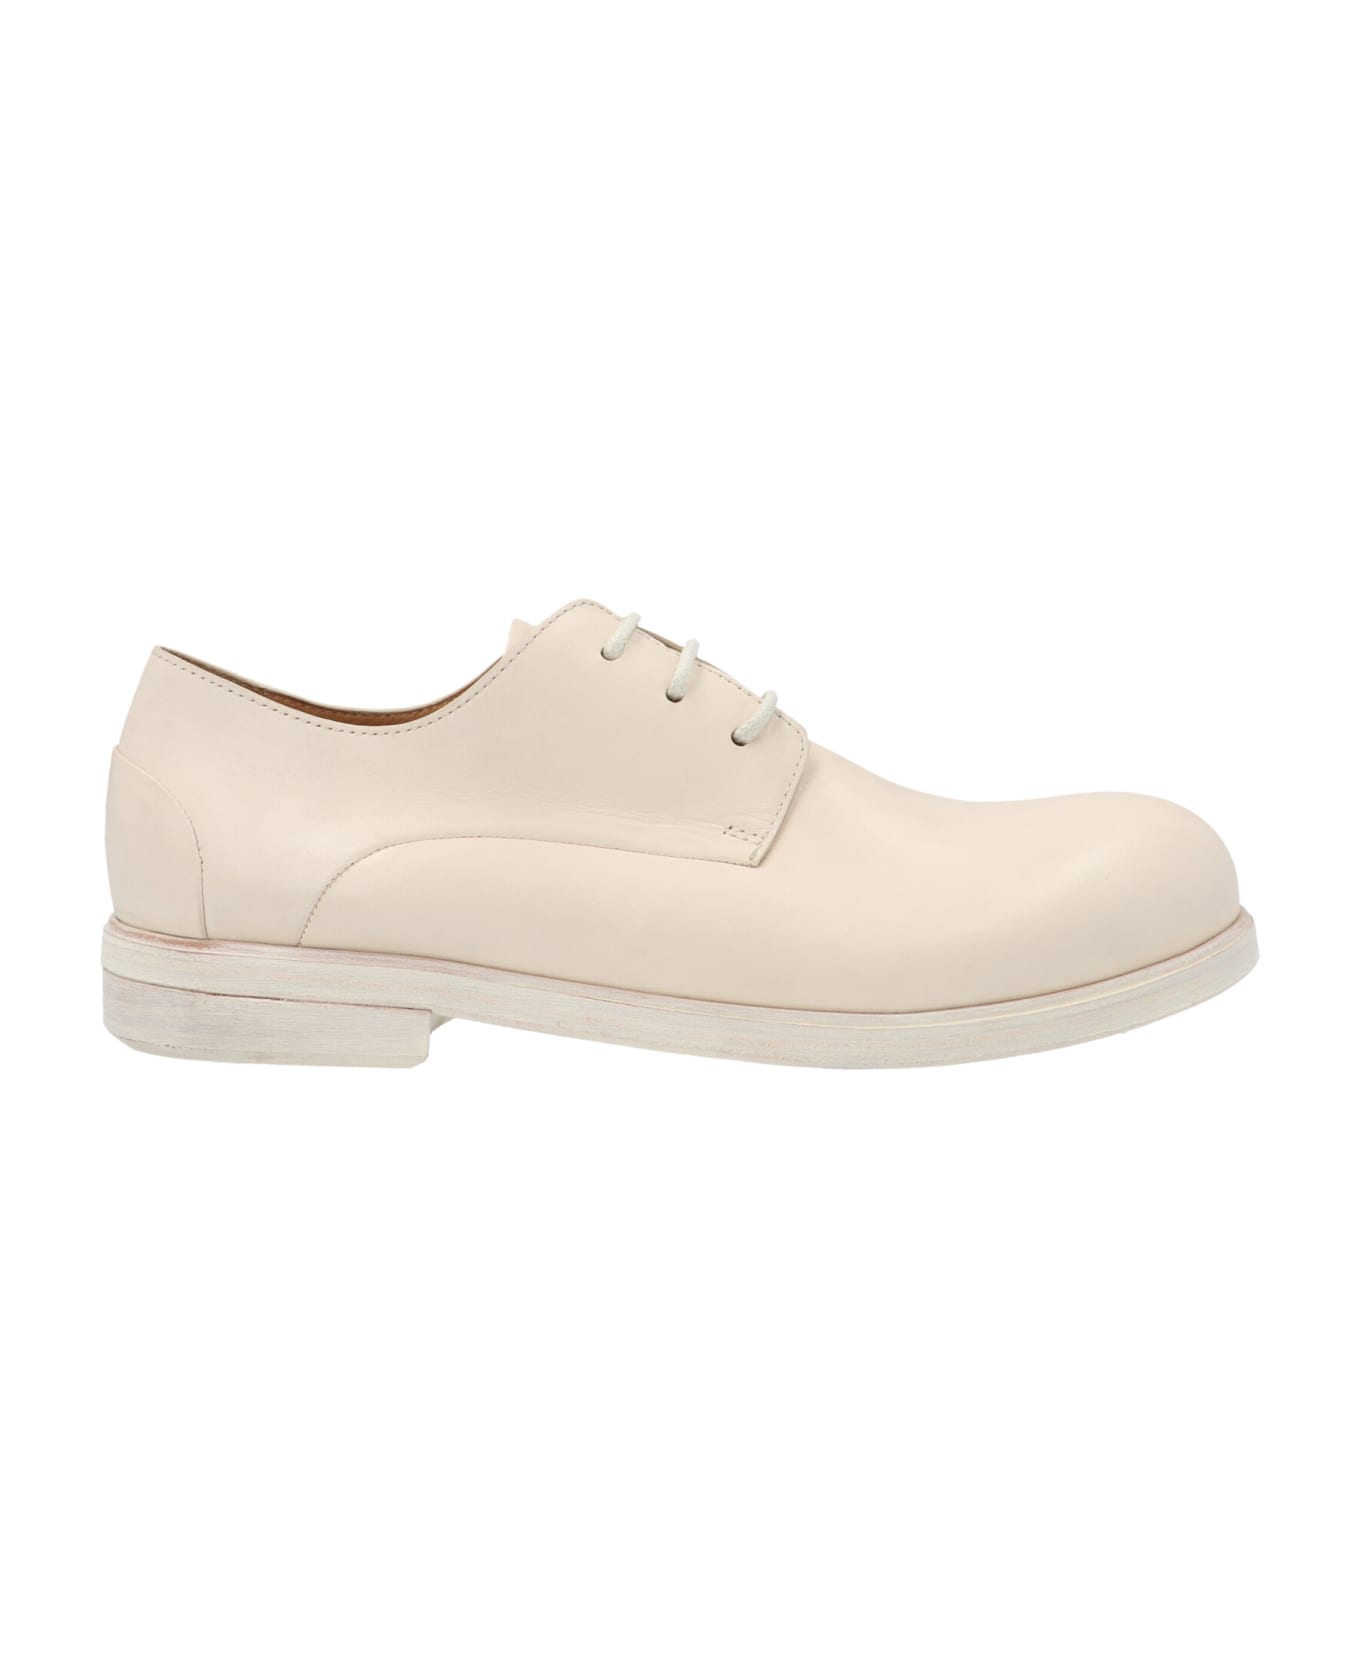 Marsell Zucca Media' Derby Tyga Shoes - White